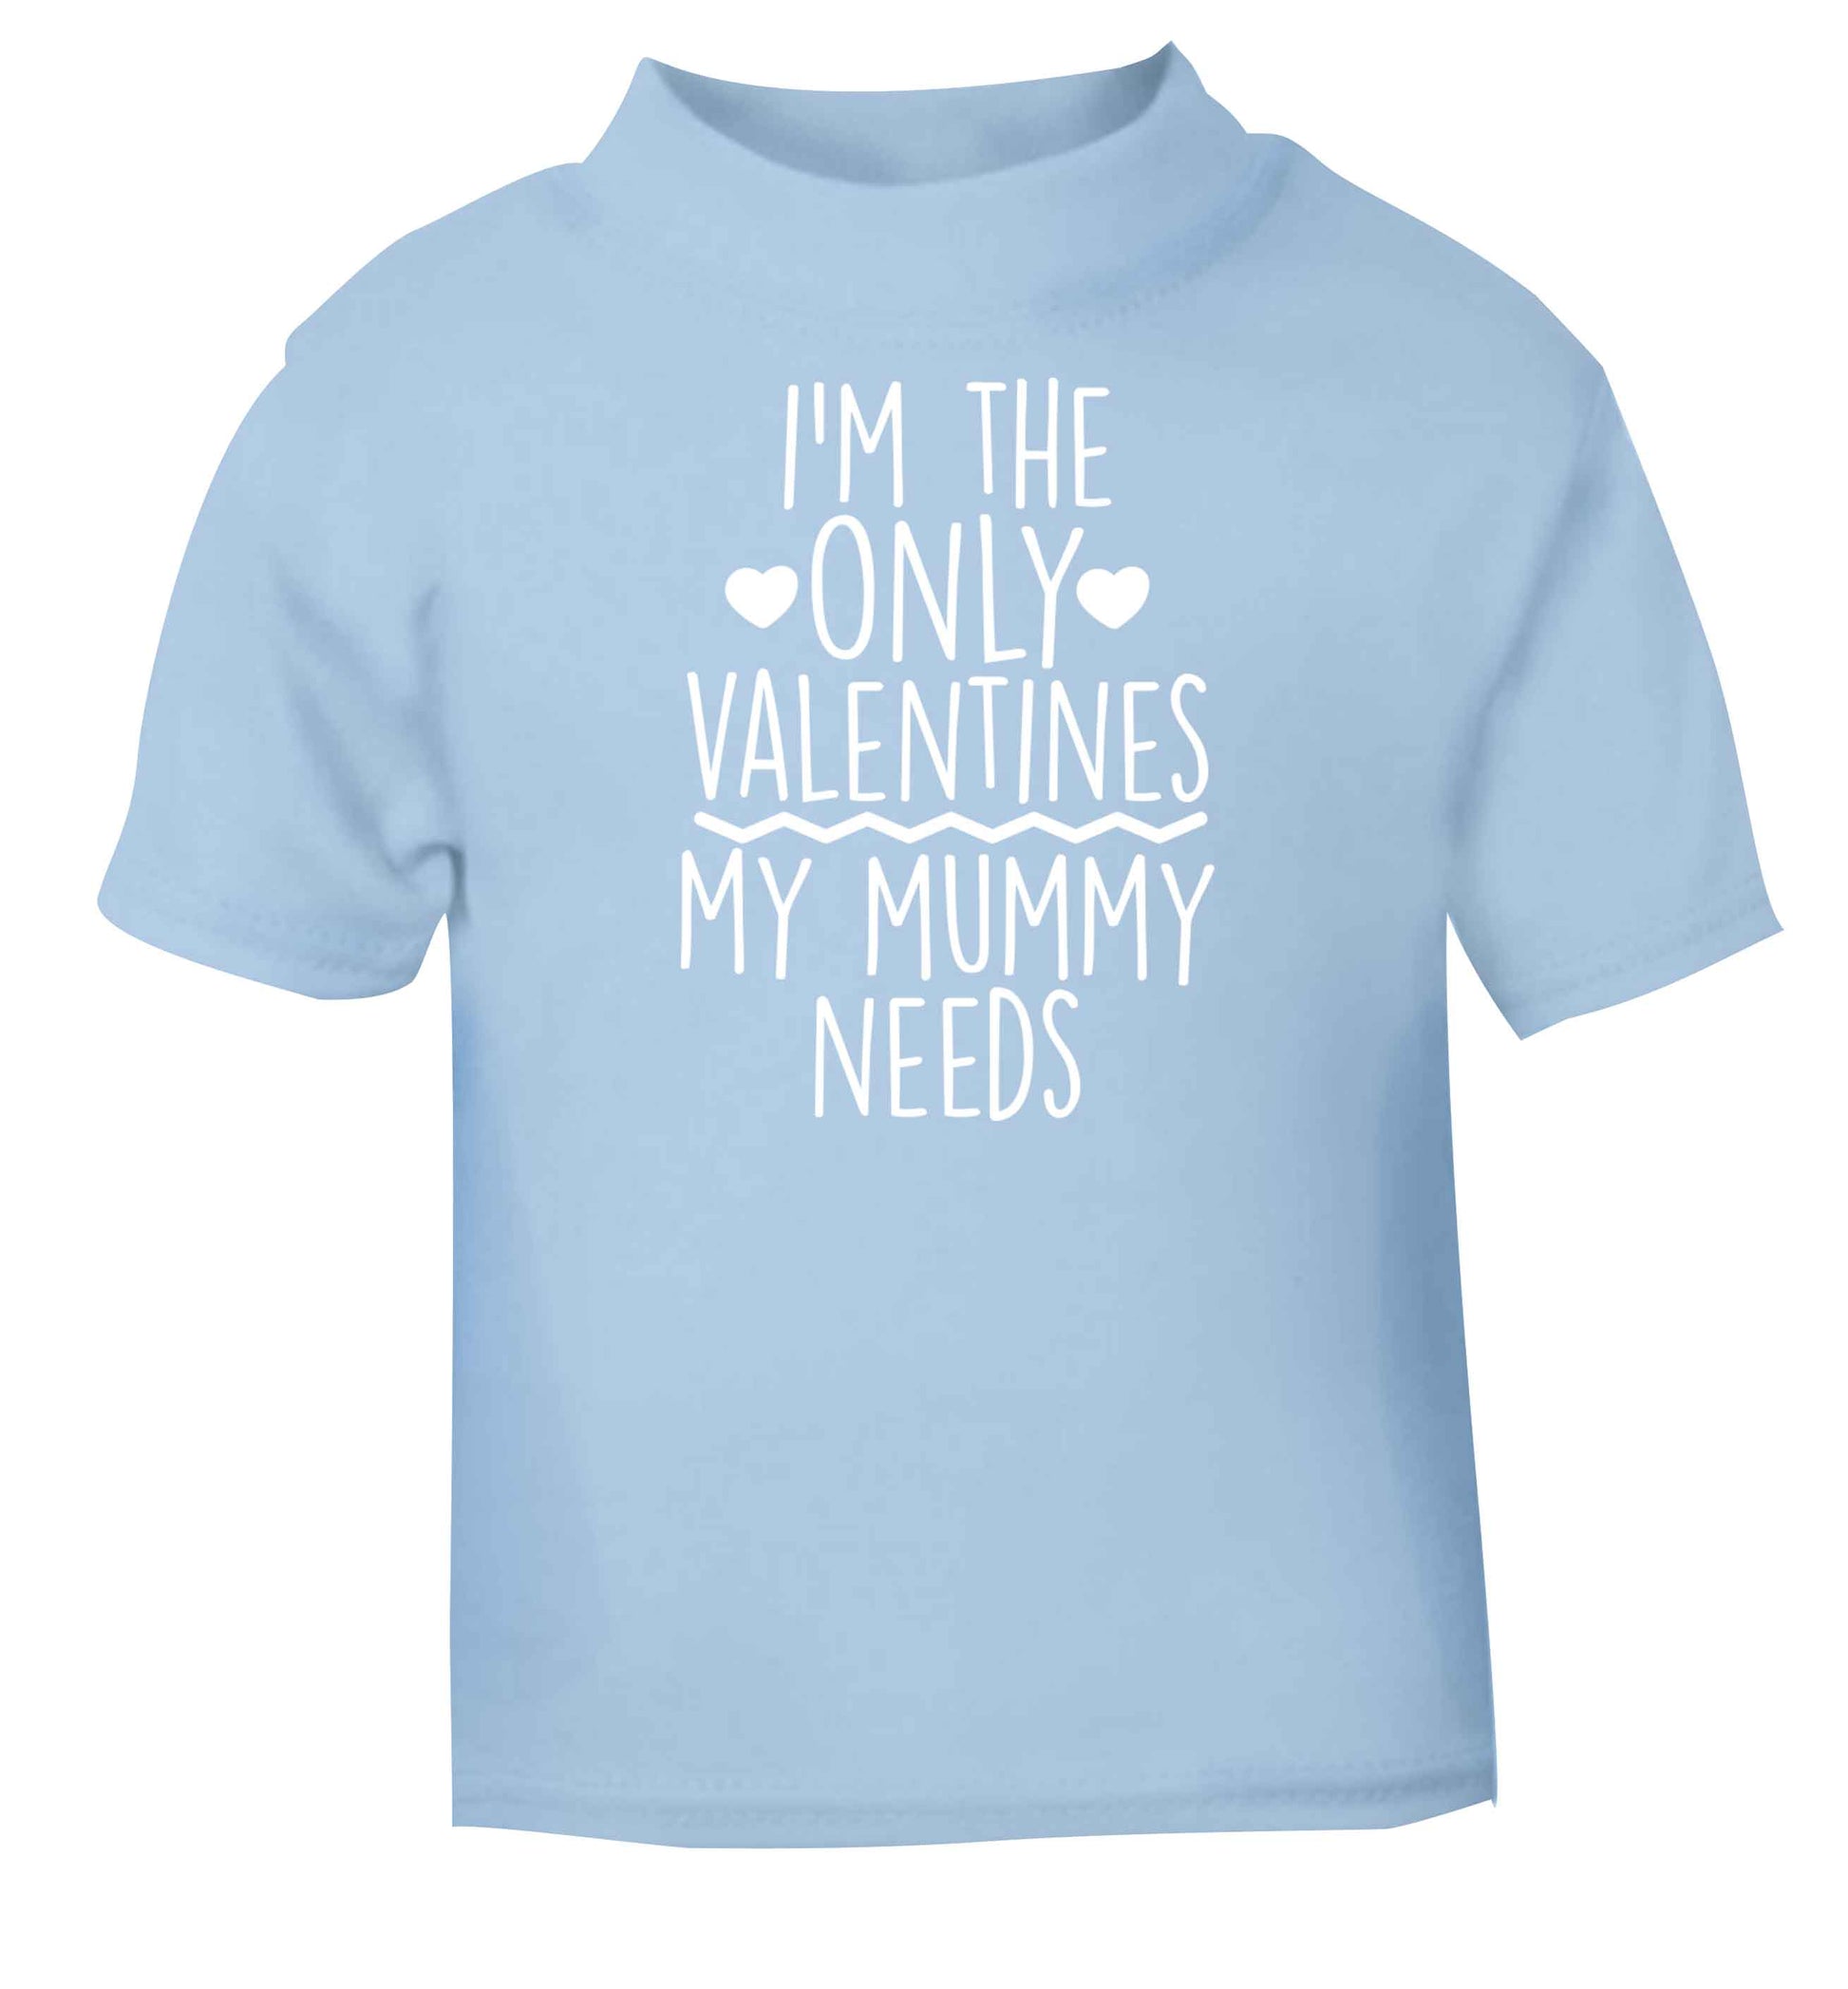 I'm the only valentines my mummy needs light blue baby toddler Tshirt 2 Years